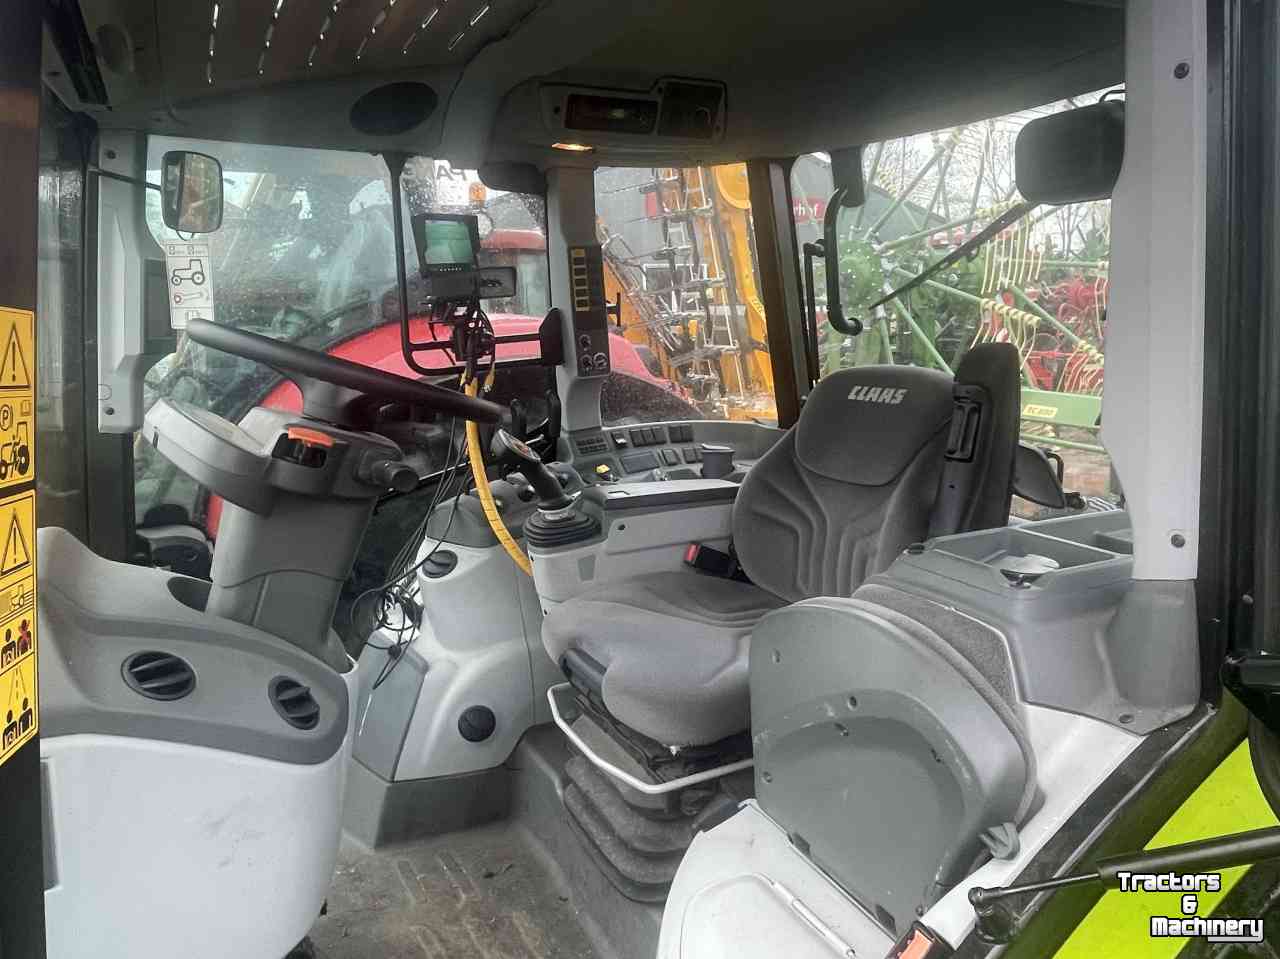 Tracteurs Claas Arion 410 Panorama CIS